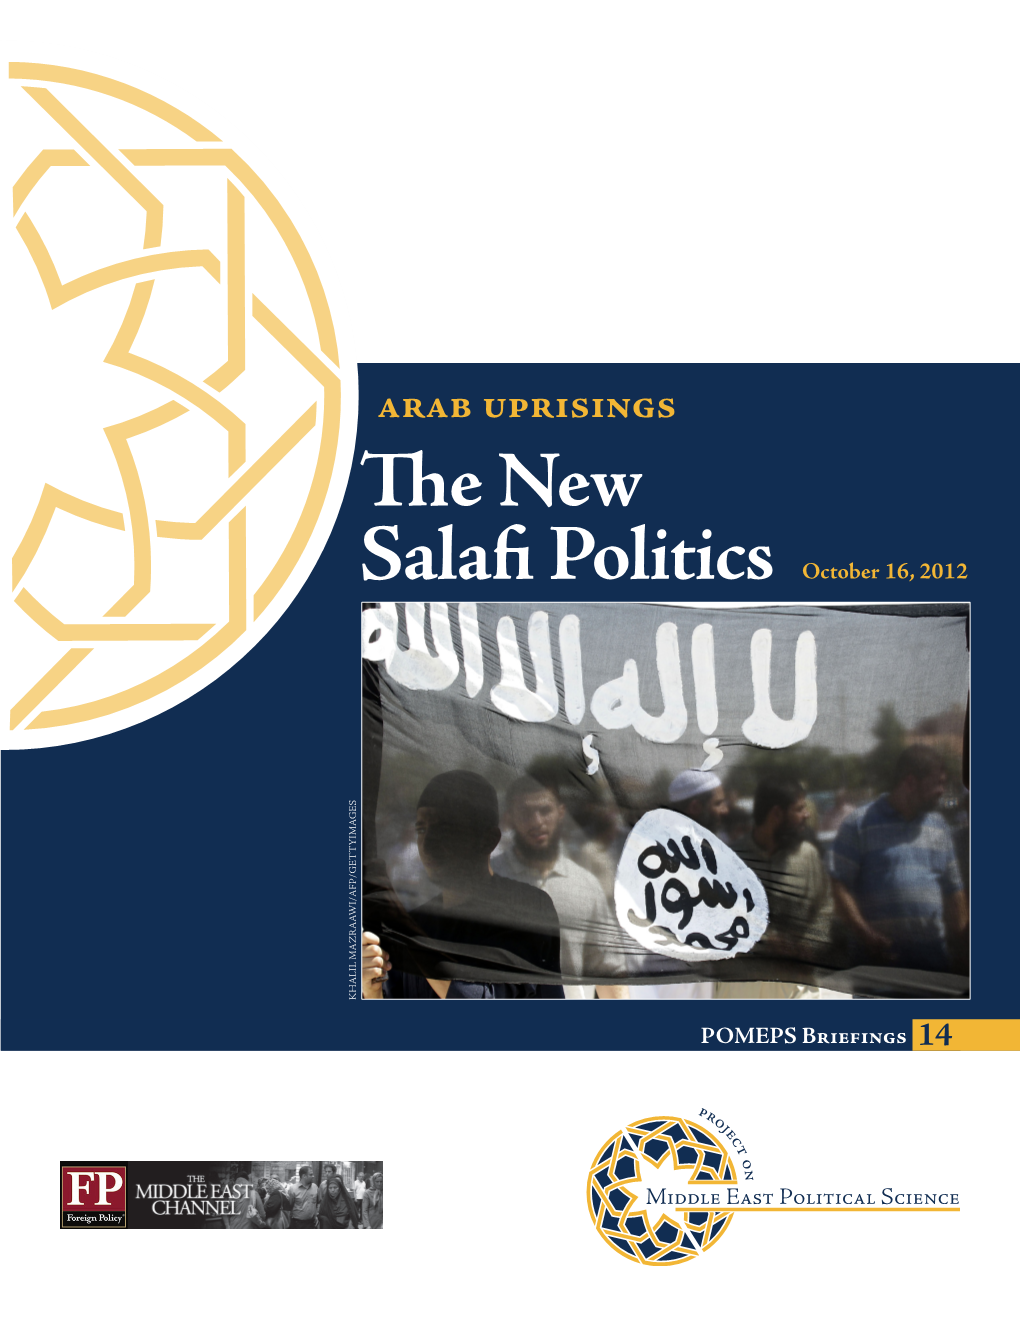 The New Salafi Politics October 16, 2012 KHALIL MAZRAAWI/AFP/GETTYIMAGES KHALIL POMEPS Briefings 14 Contents